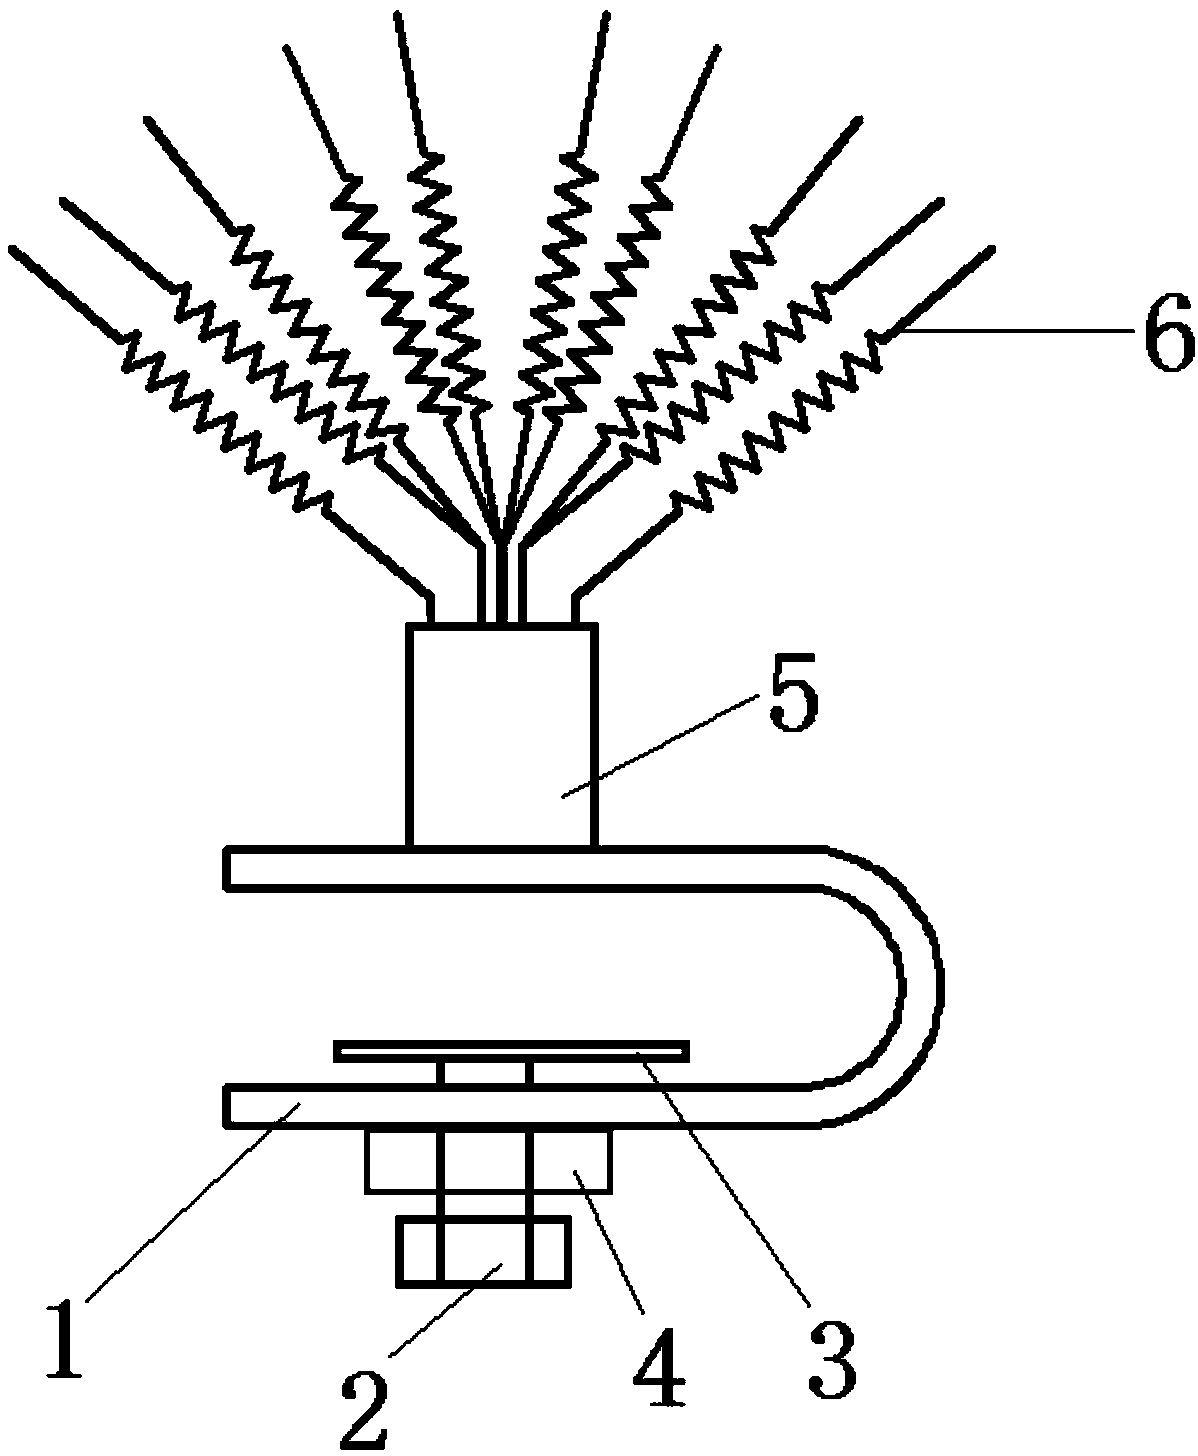 Bird-repellent device for insulator of electric power tower